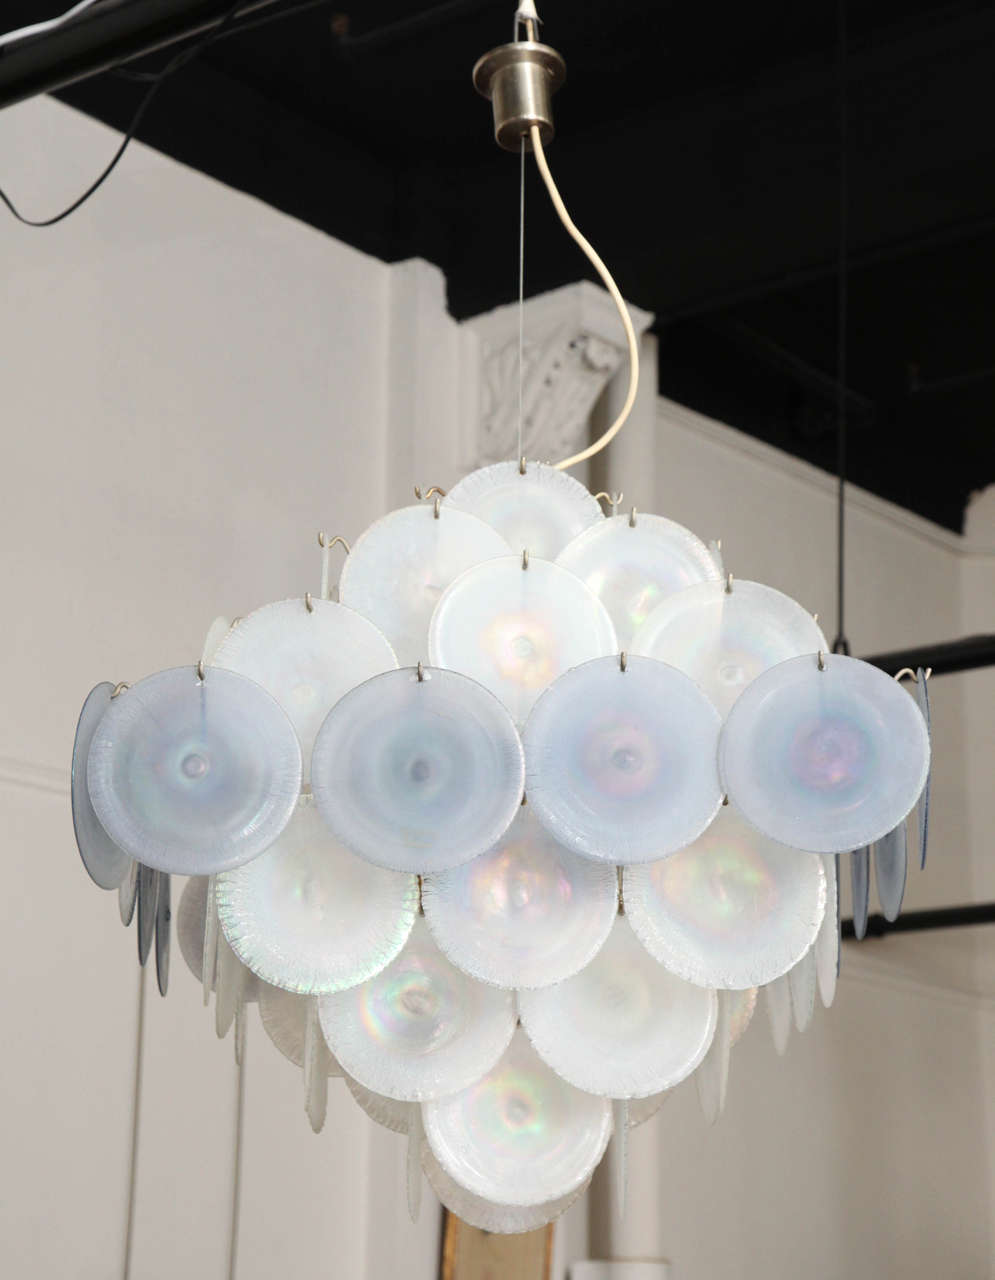 Fabulous large chandelier made in Venice 1969 by Mazzega designed by carol Nason. 64 blown glass disks in a iridescent pearl with a pail gray blue stretch glass technic, all original from 1960s, great quality glass. On the diagonal it's 30”.